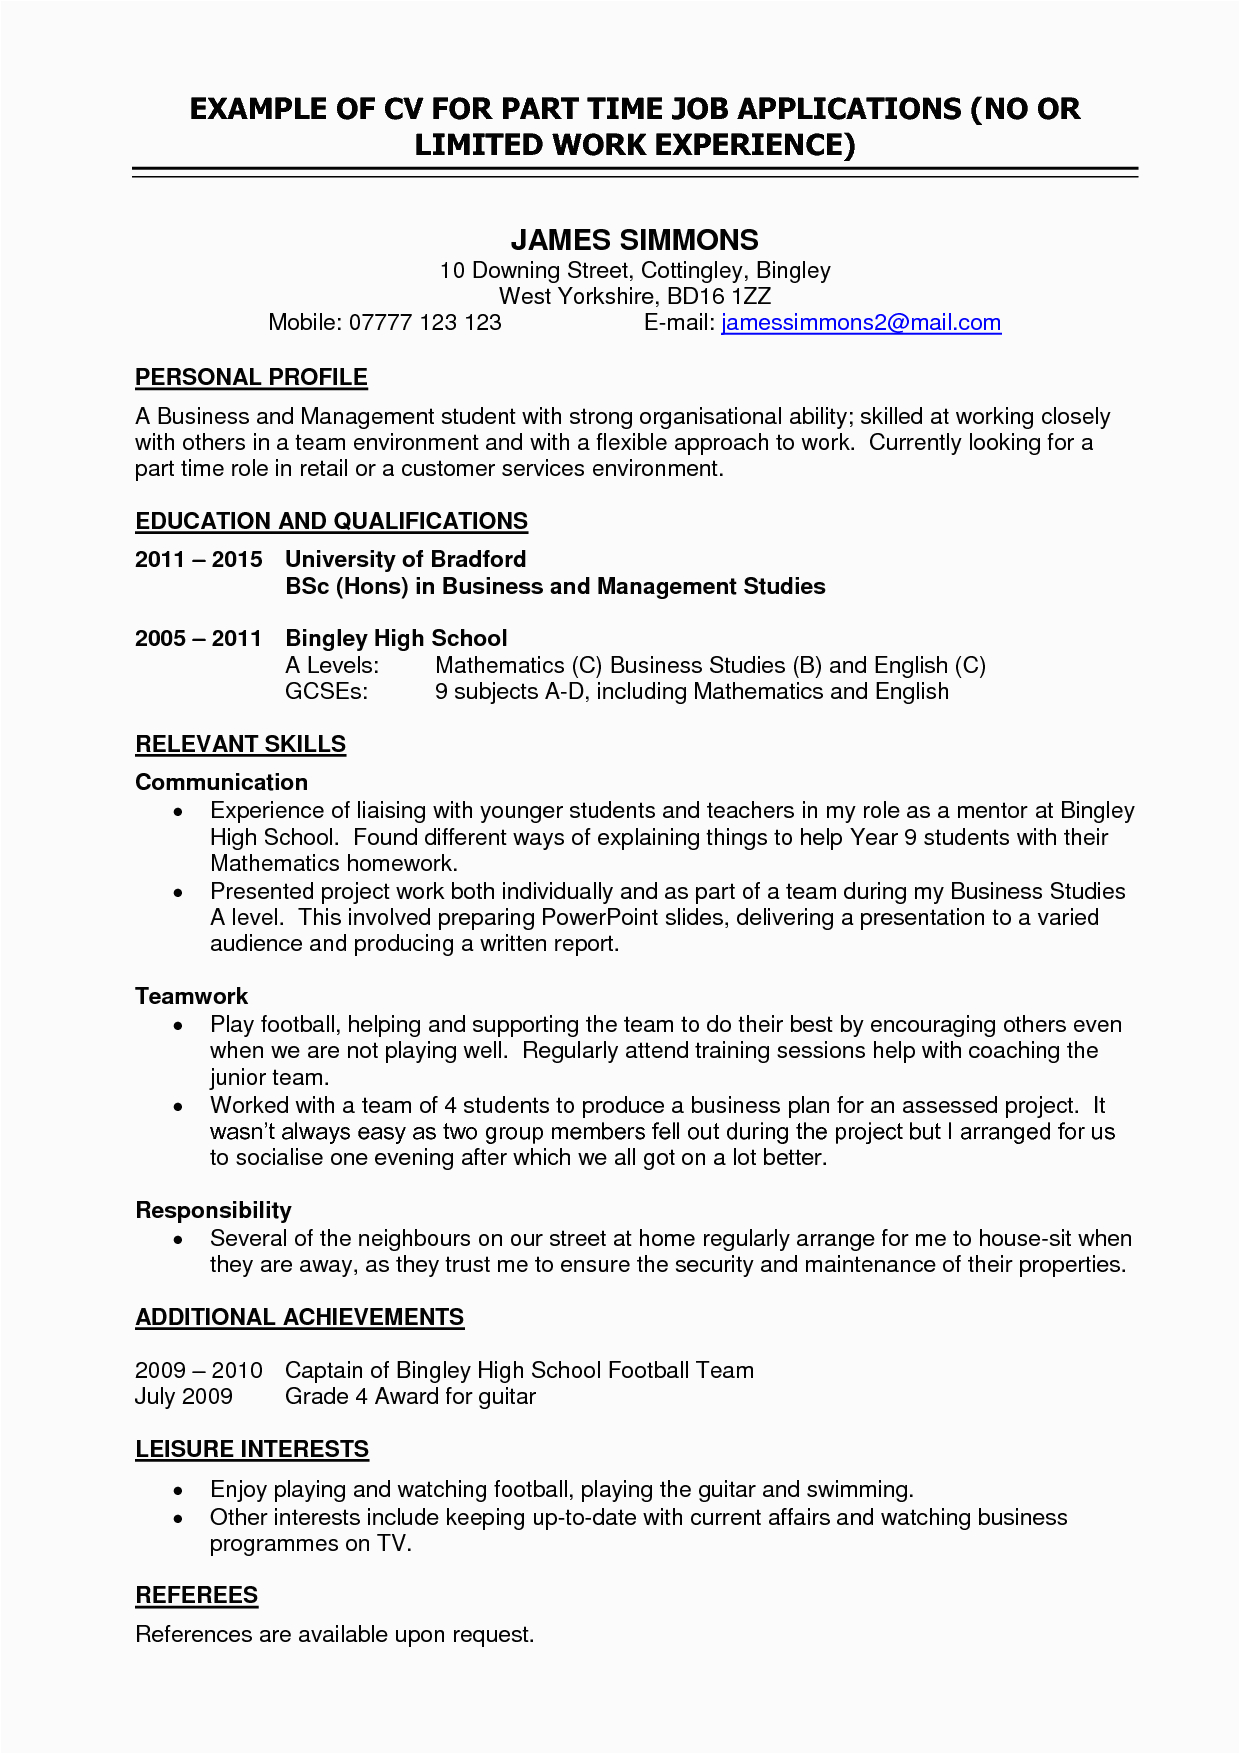 Sample Resume for College Student Looking for Part Time Job Part Time Work Resume the Best Expert S Estimate